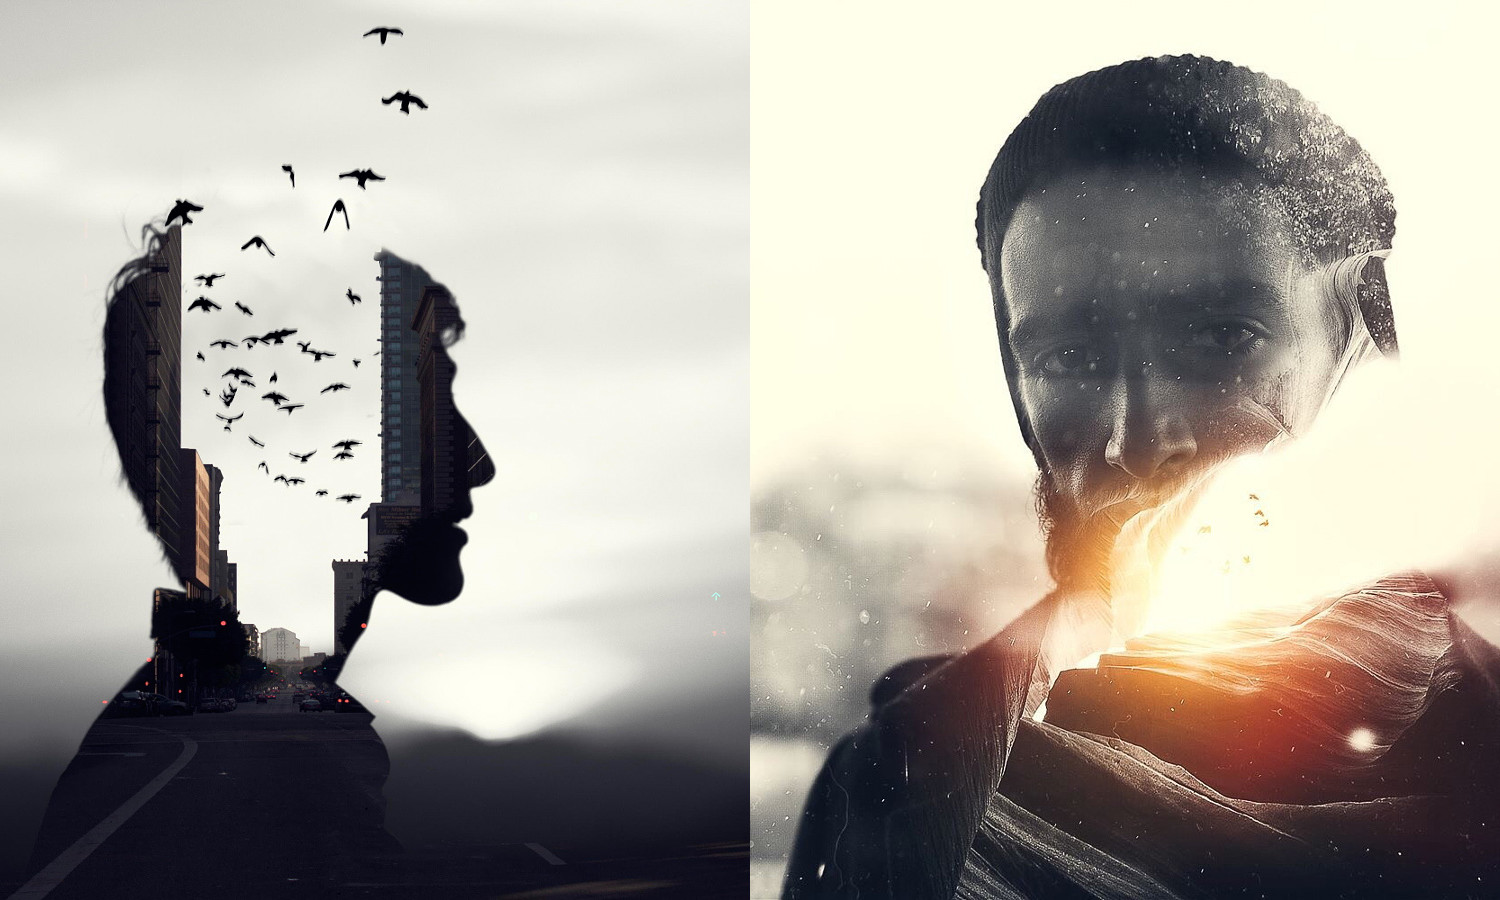 21 Awesome Multiple Exposures That'll Spark Your Creativity